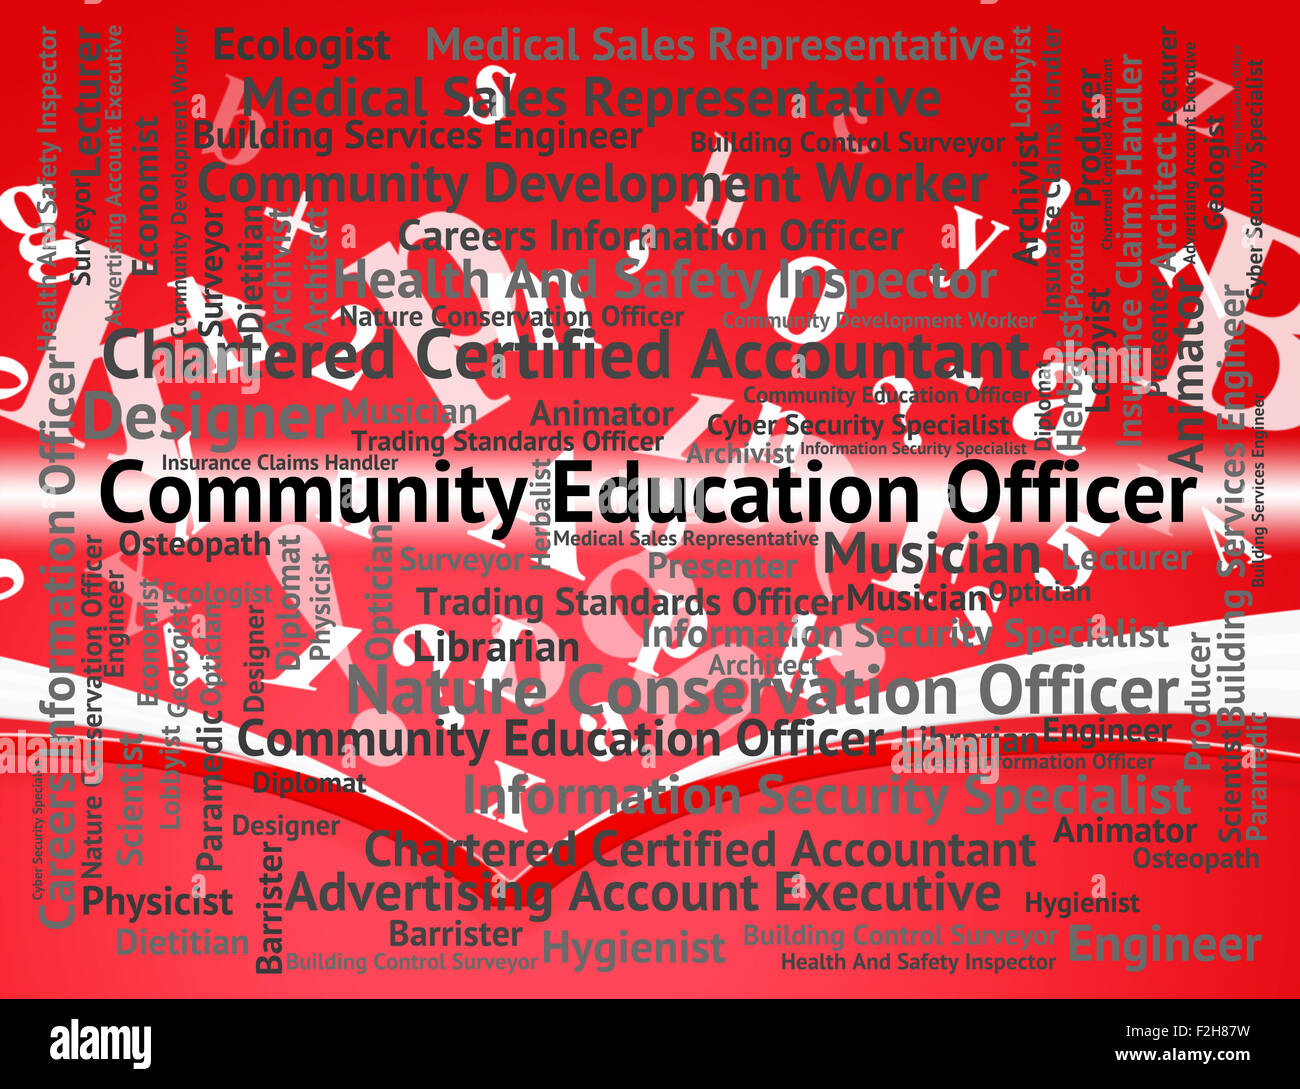 Community Education Officer Showing Organized Group And United Stock Photo